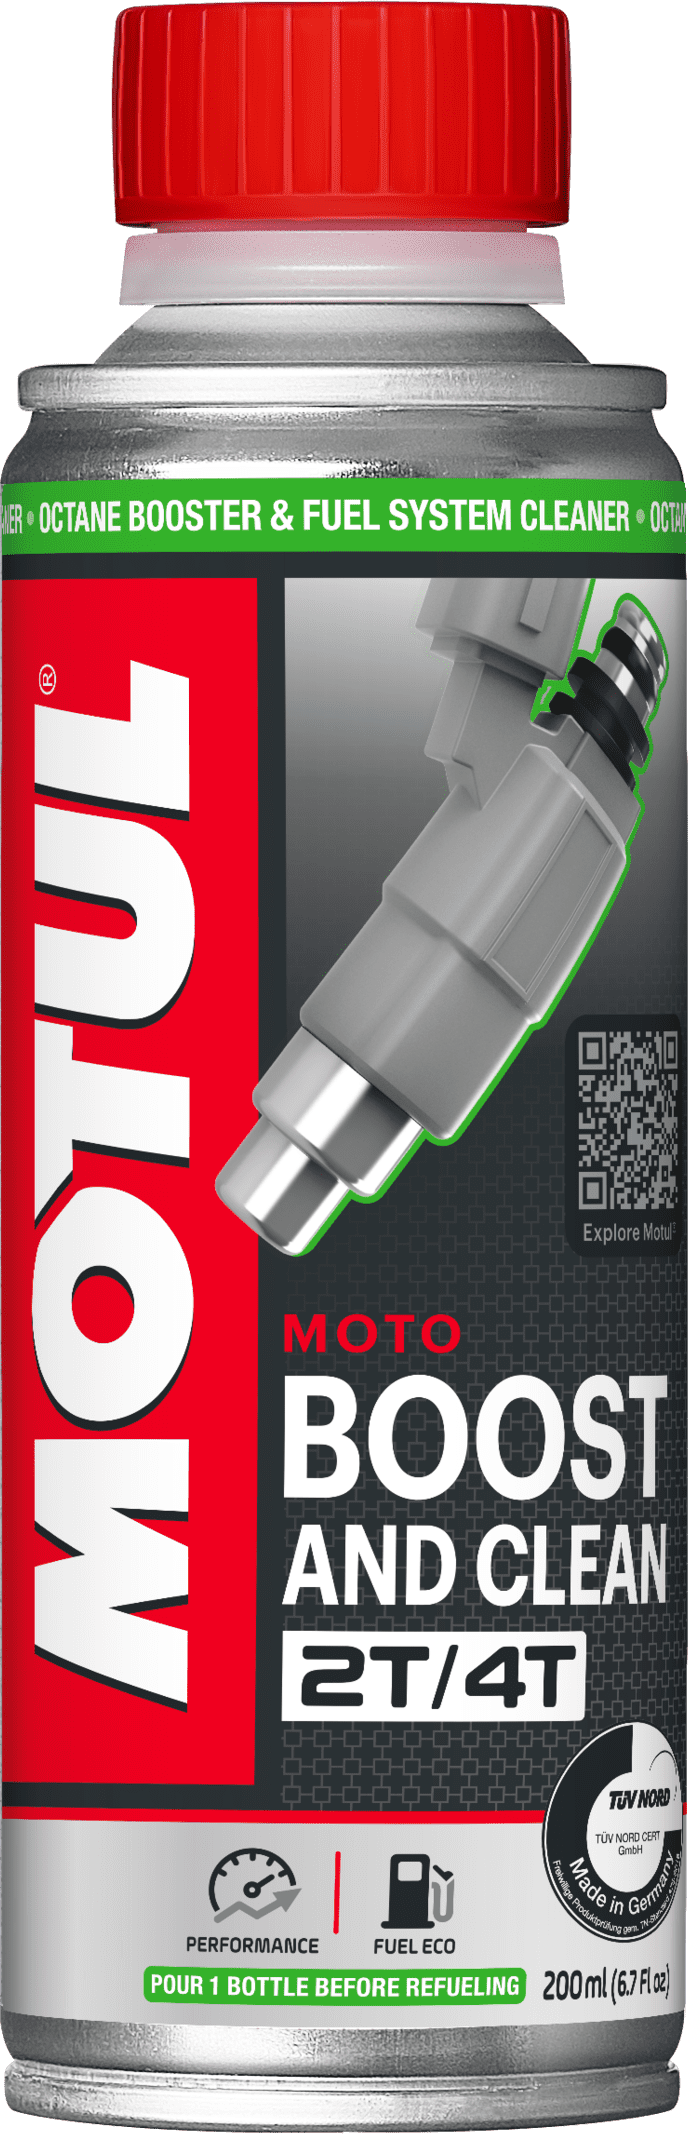 110873-200ML MOTUL Boost And Clean MOTO is a fuel additive to be added to gasoline, which can be used in all types of 2-Stroke and 4-Stroke motorcycle engines.